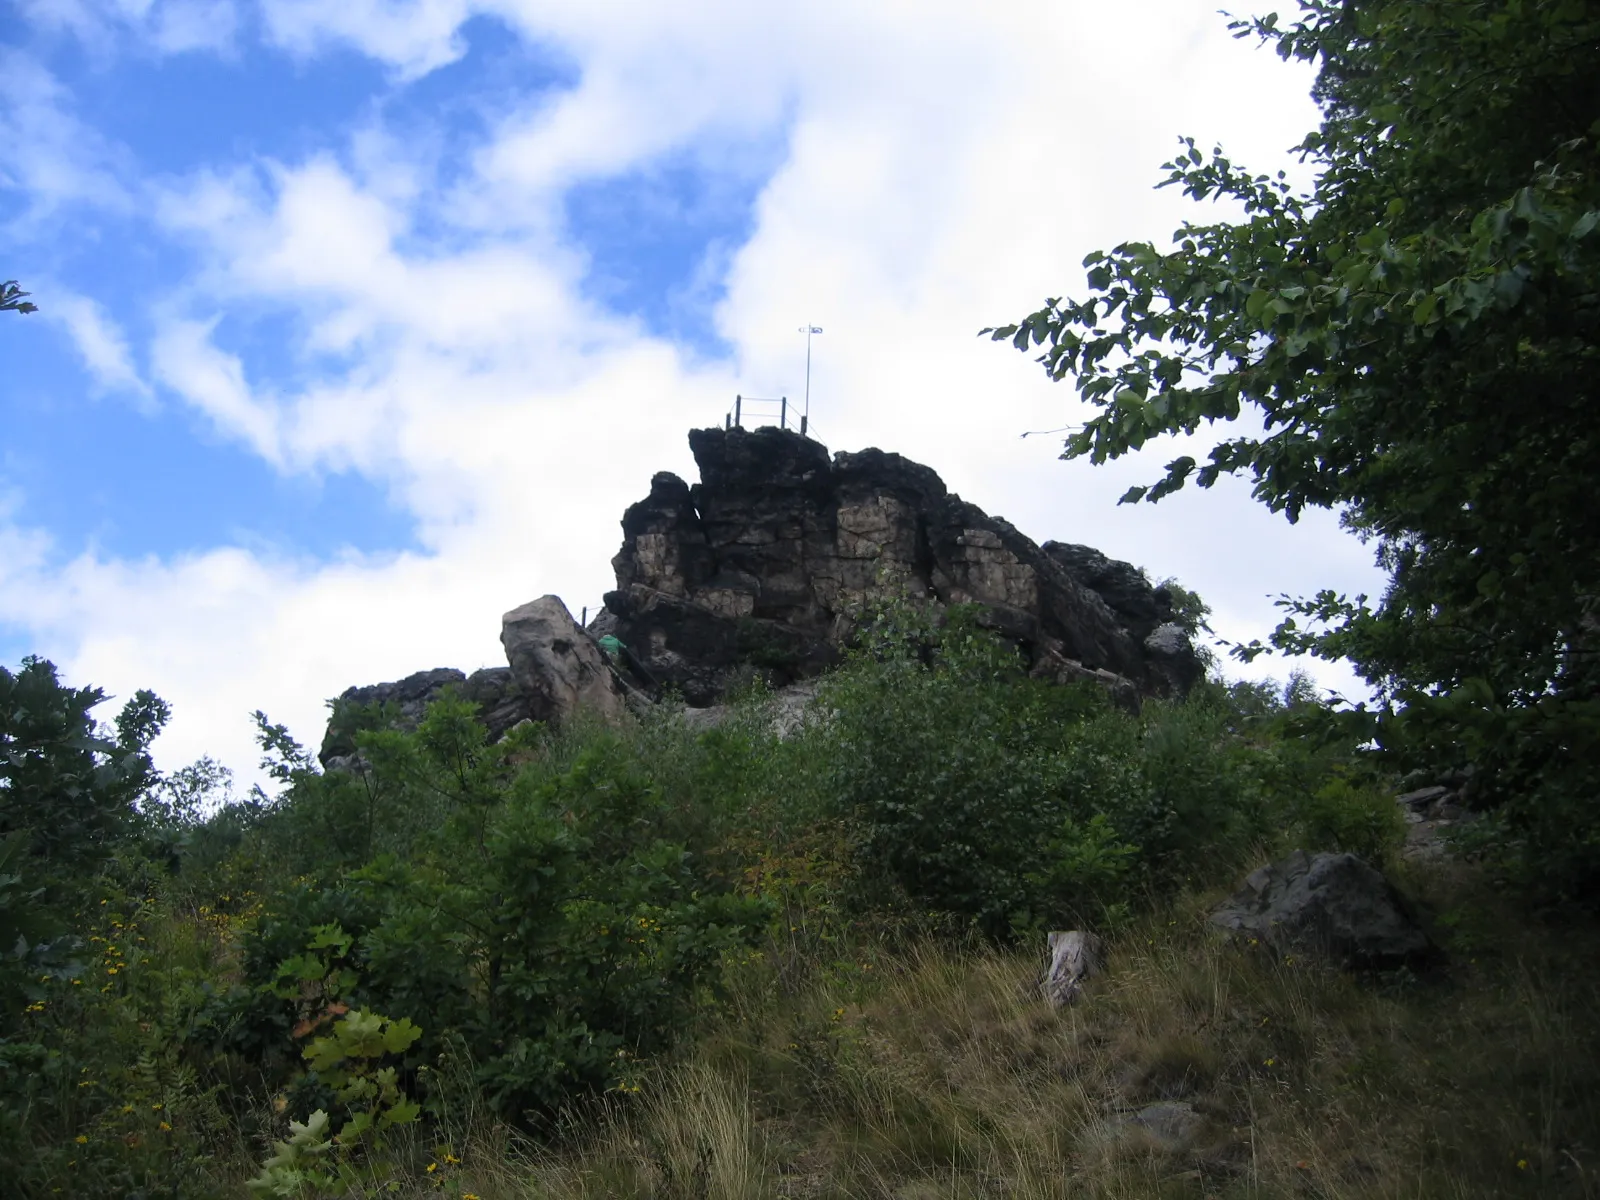 Photo showing: The rock formation on the Teufelsmauer known as the Großvater ("grandfather") which overlooks Blankenburg just north of the Harz Mountains of Germany.